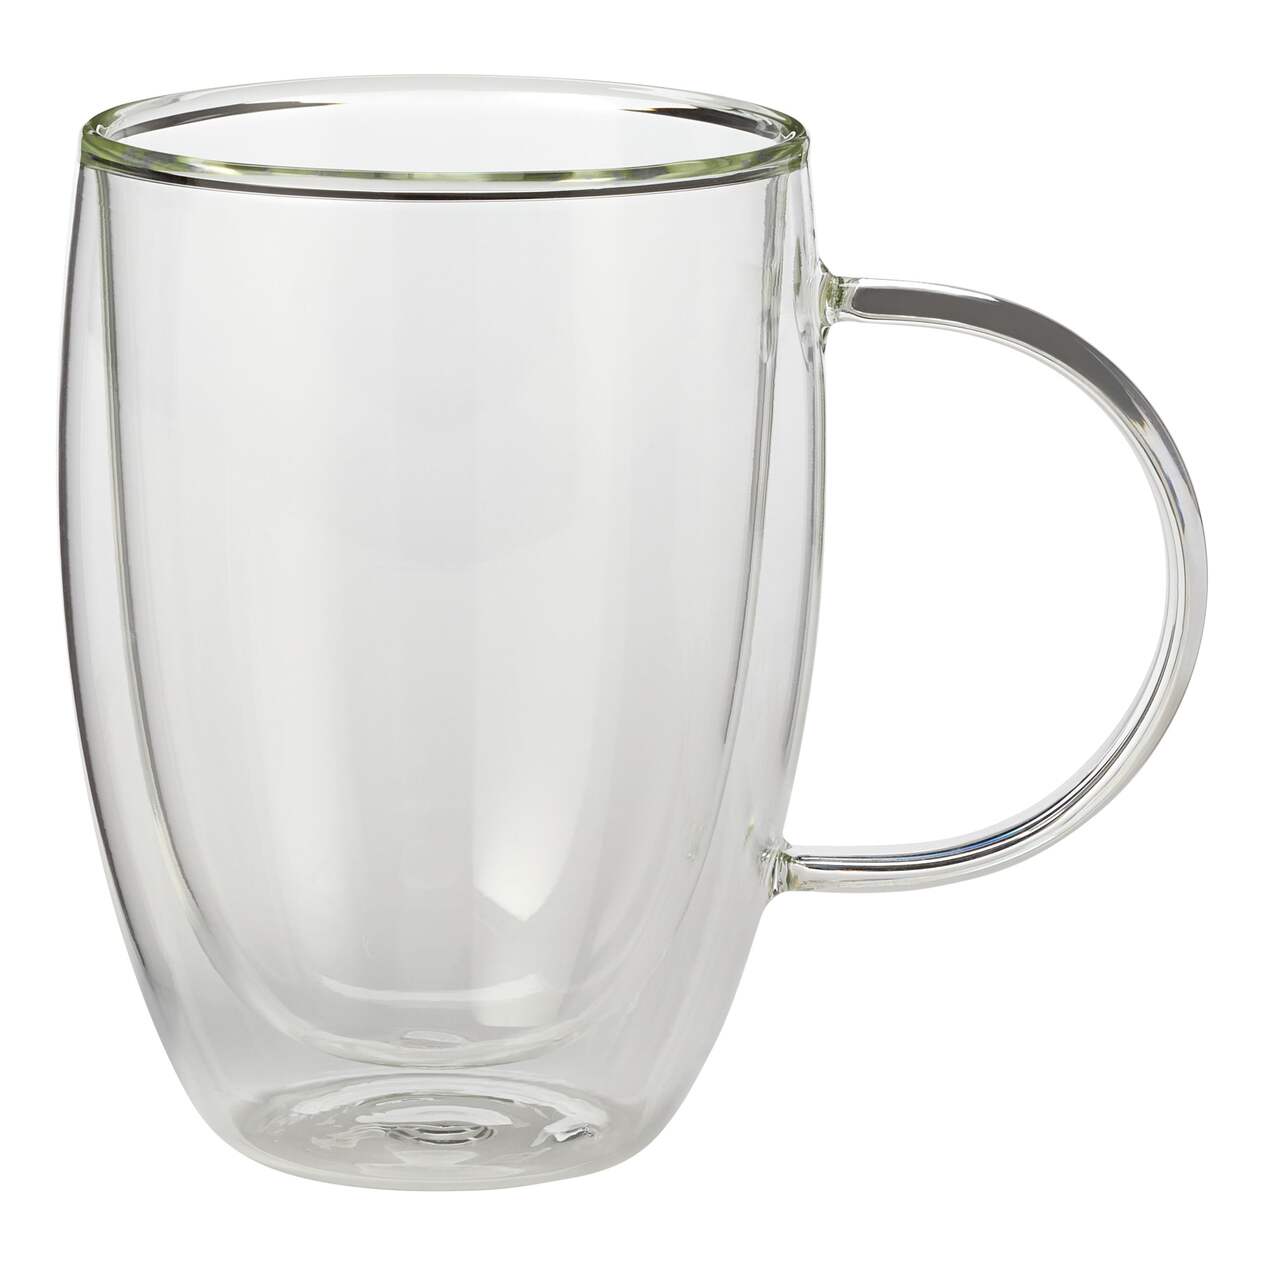 https://media-www.canadiantire.ca/product/living/kitchen/dining-and-entertaining/1429859/canvas-2-pack-double-wall-glass-mugs-388fd18c-39af-44d0-96e1-16e68e4b7803-jpgrendition.jpg?imdensity=1&imwidth=640&impolicy=mZoom